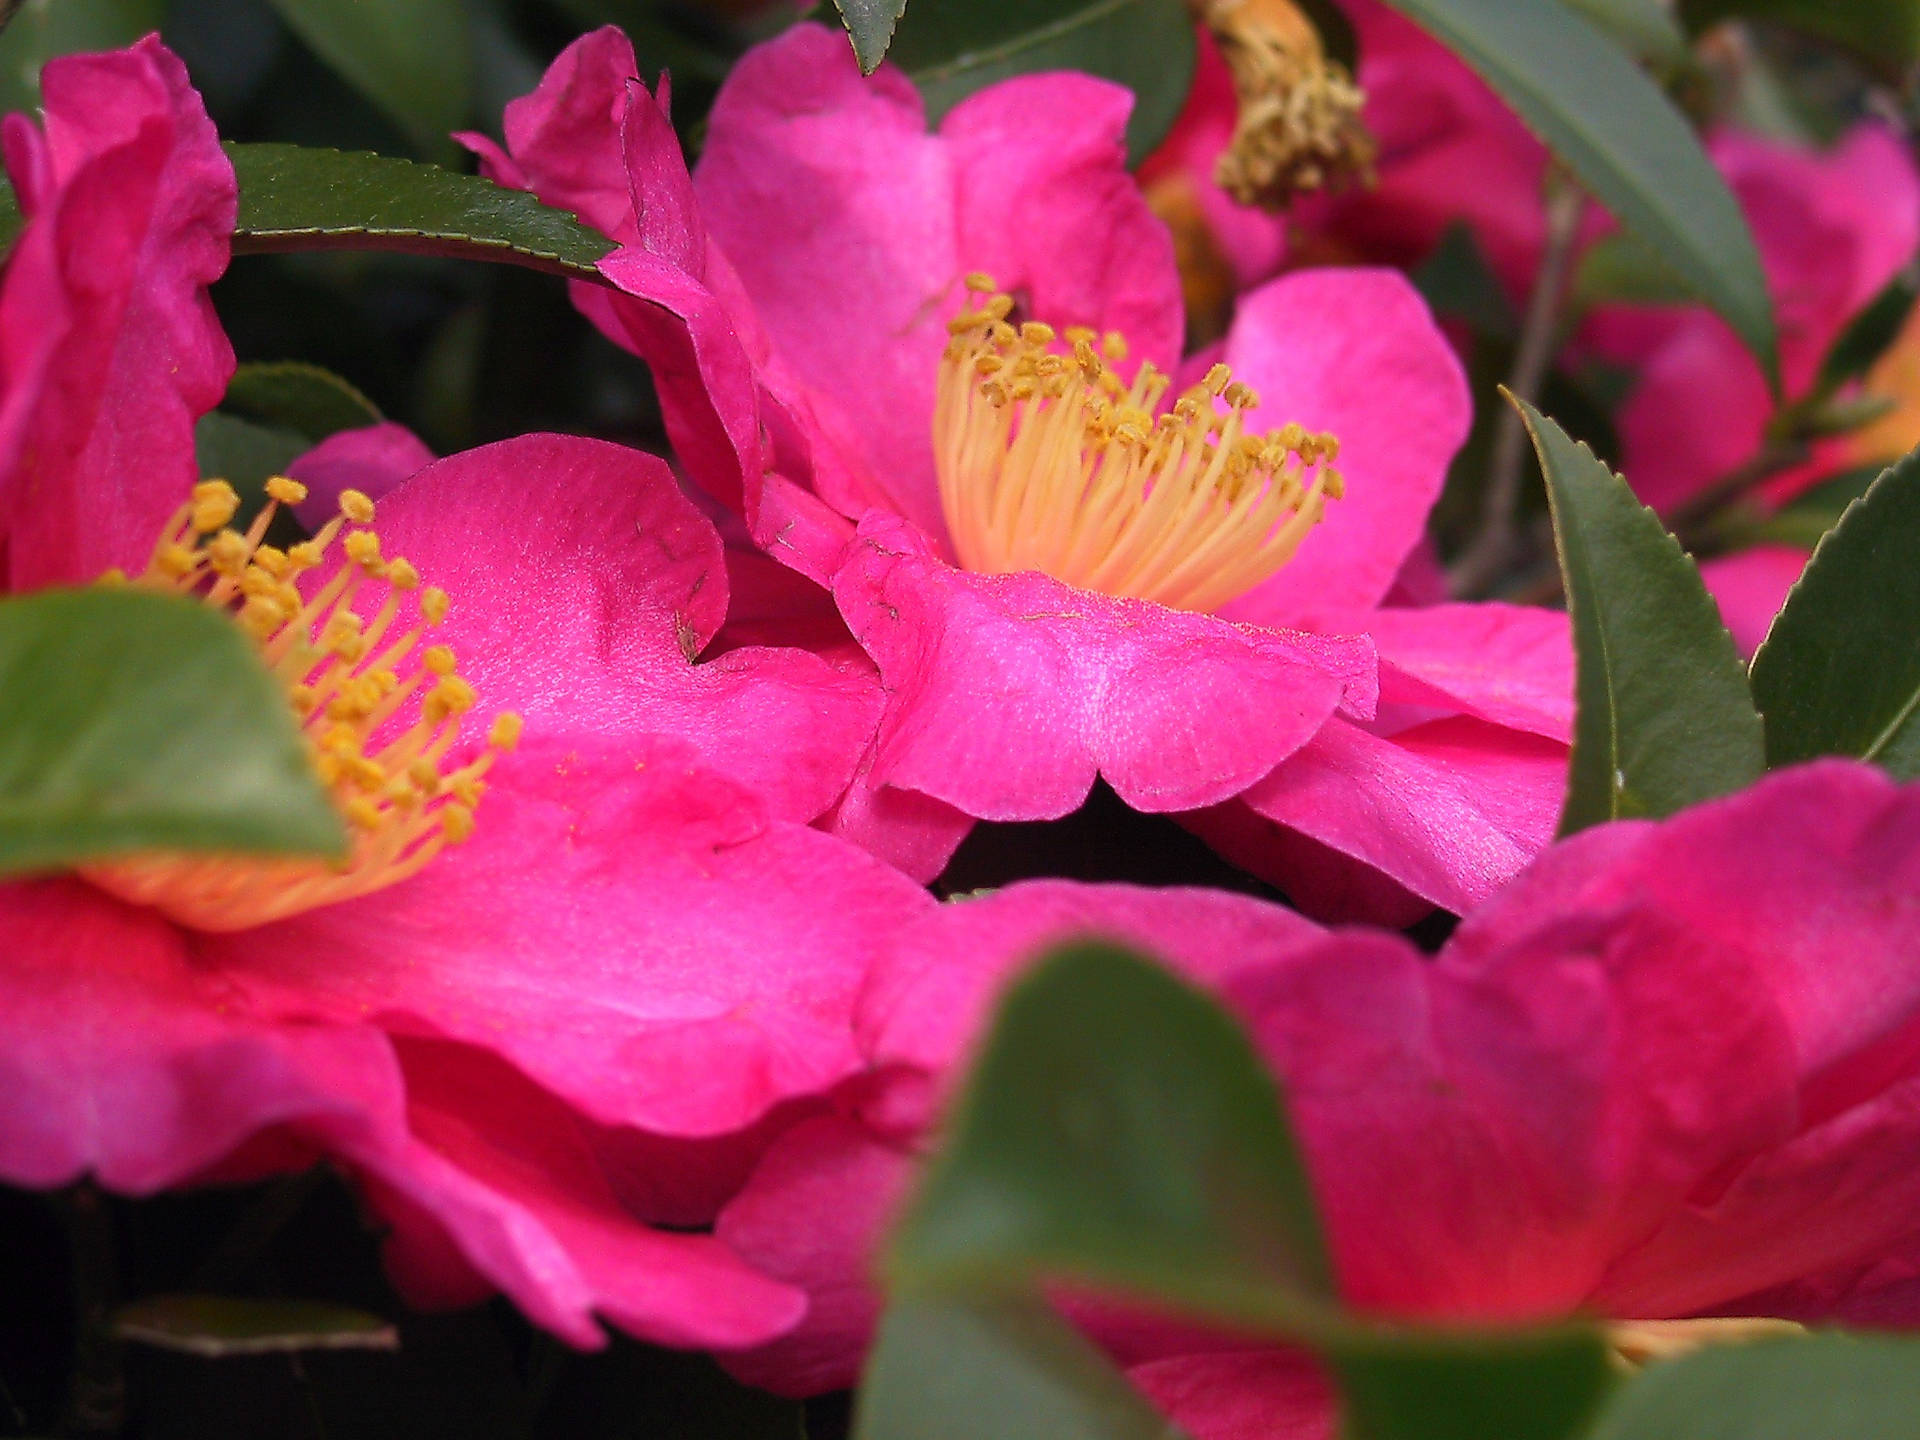 Blooming Camellia Sasanqua Under The Bright Sunlight Background